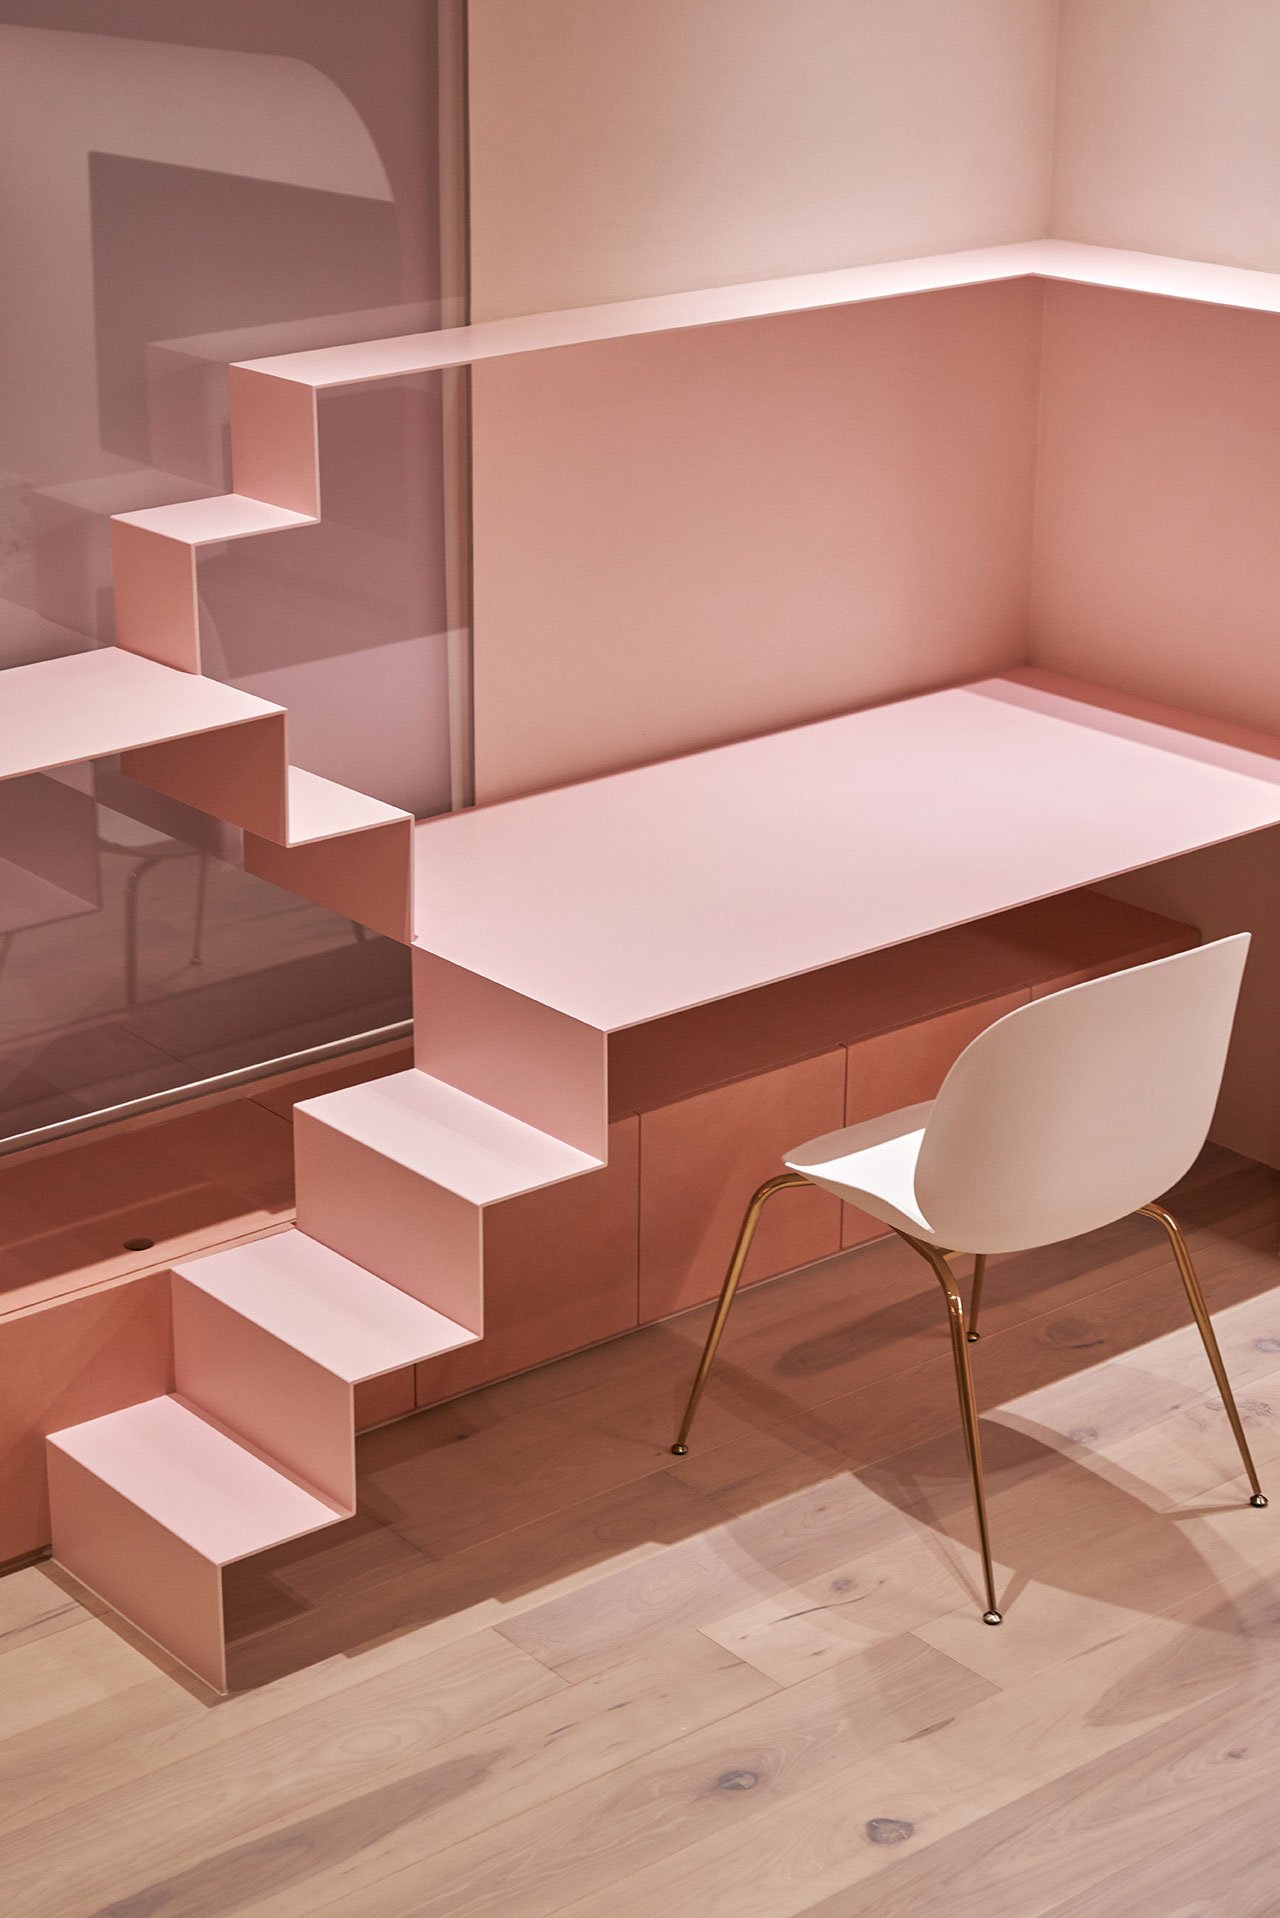 Cats’ Pink House by KC design studio.
Photography by Hey! Cheese.